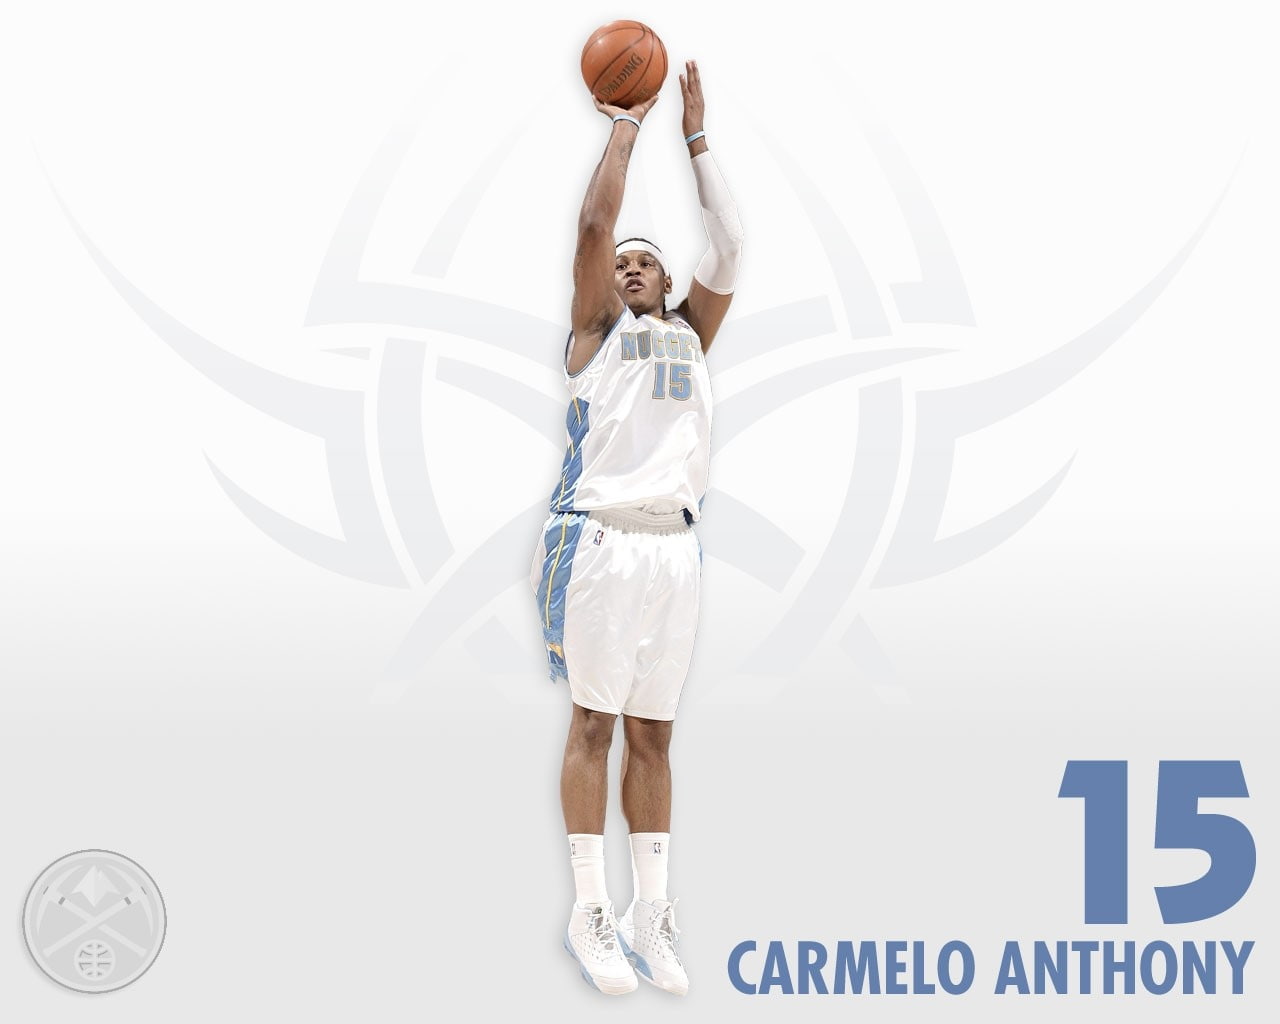 Carmelo anthony, Jump, Basketball player, Number, one person